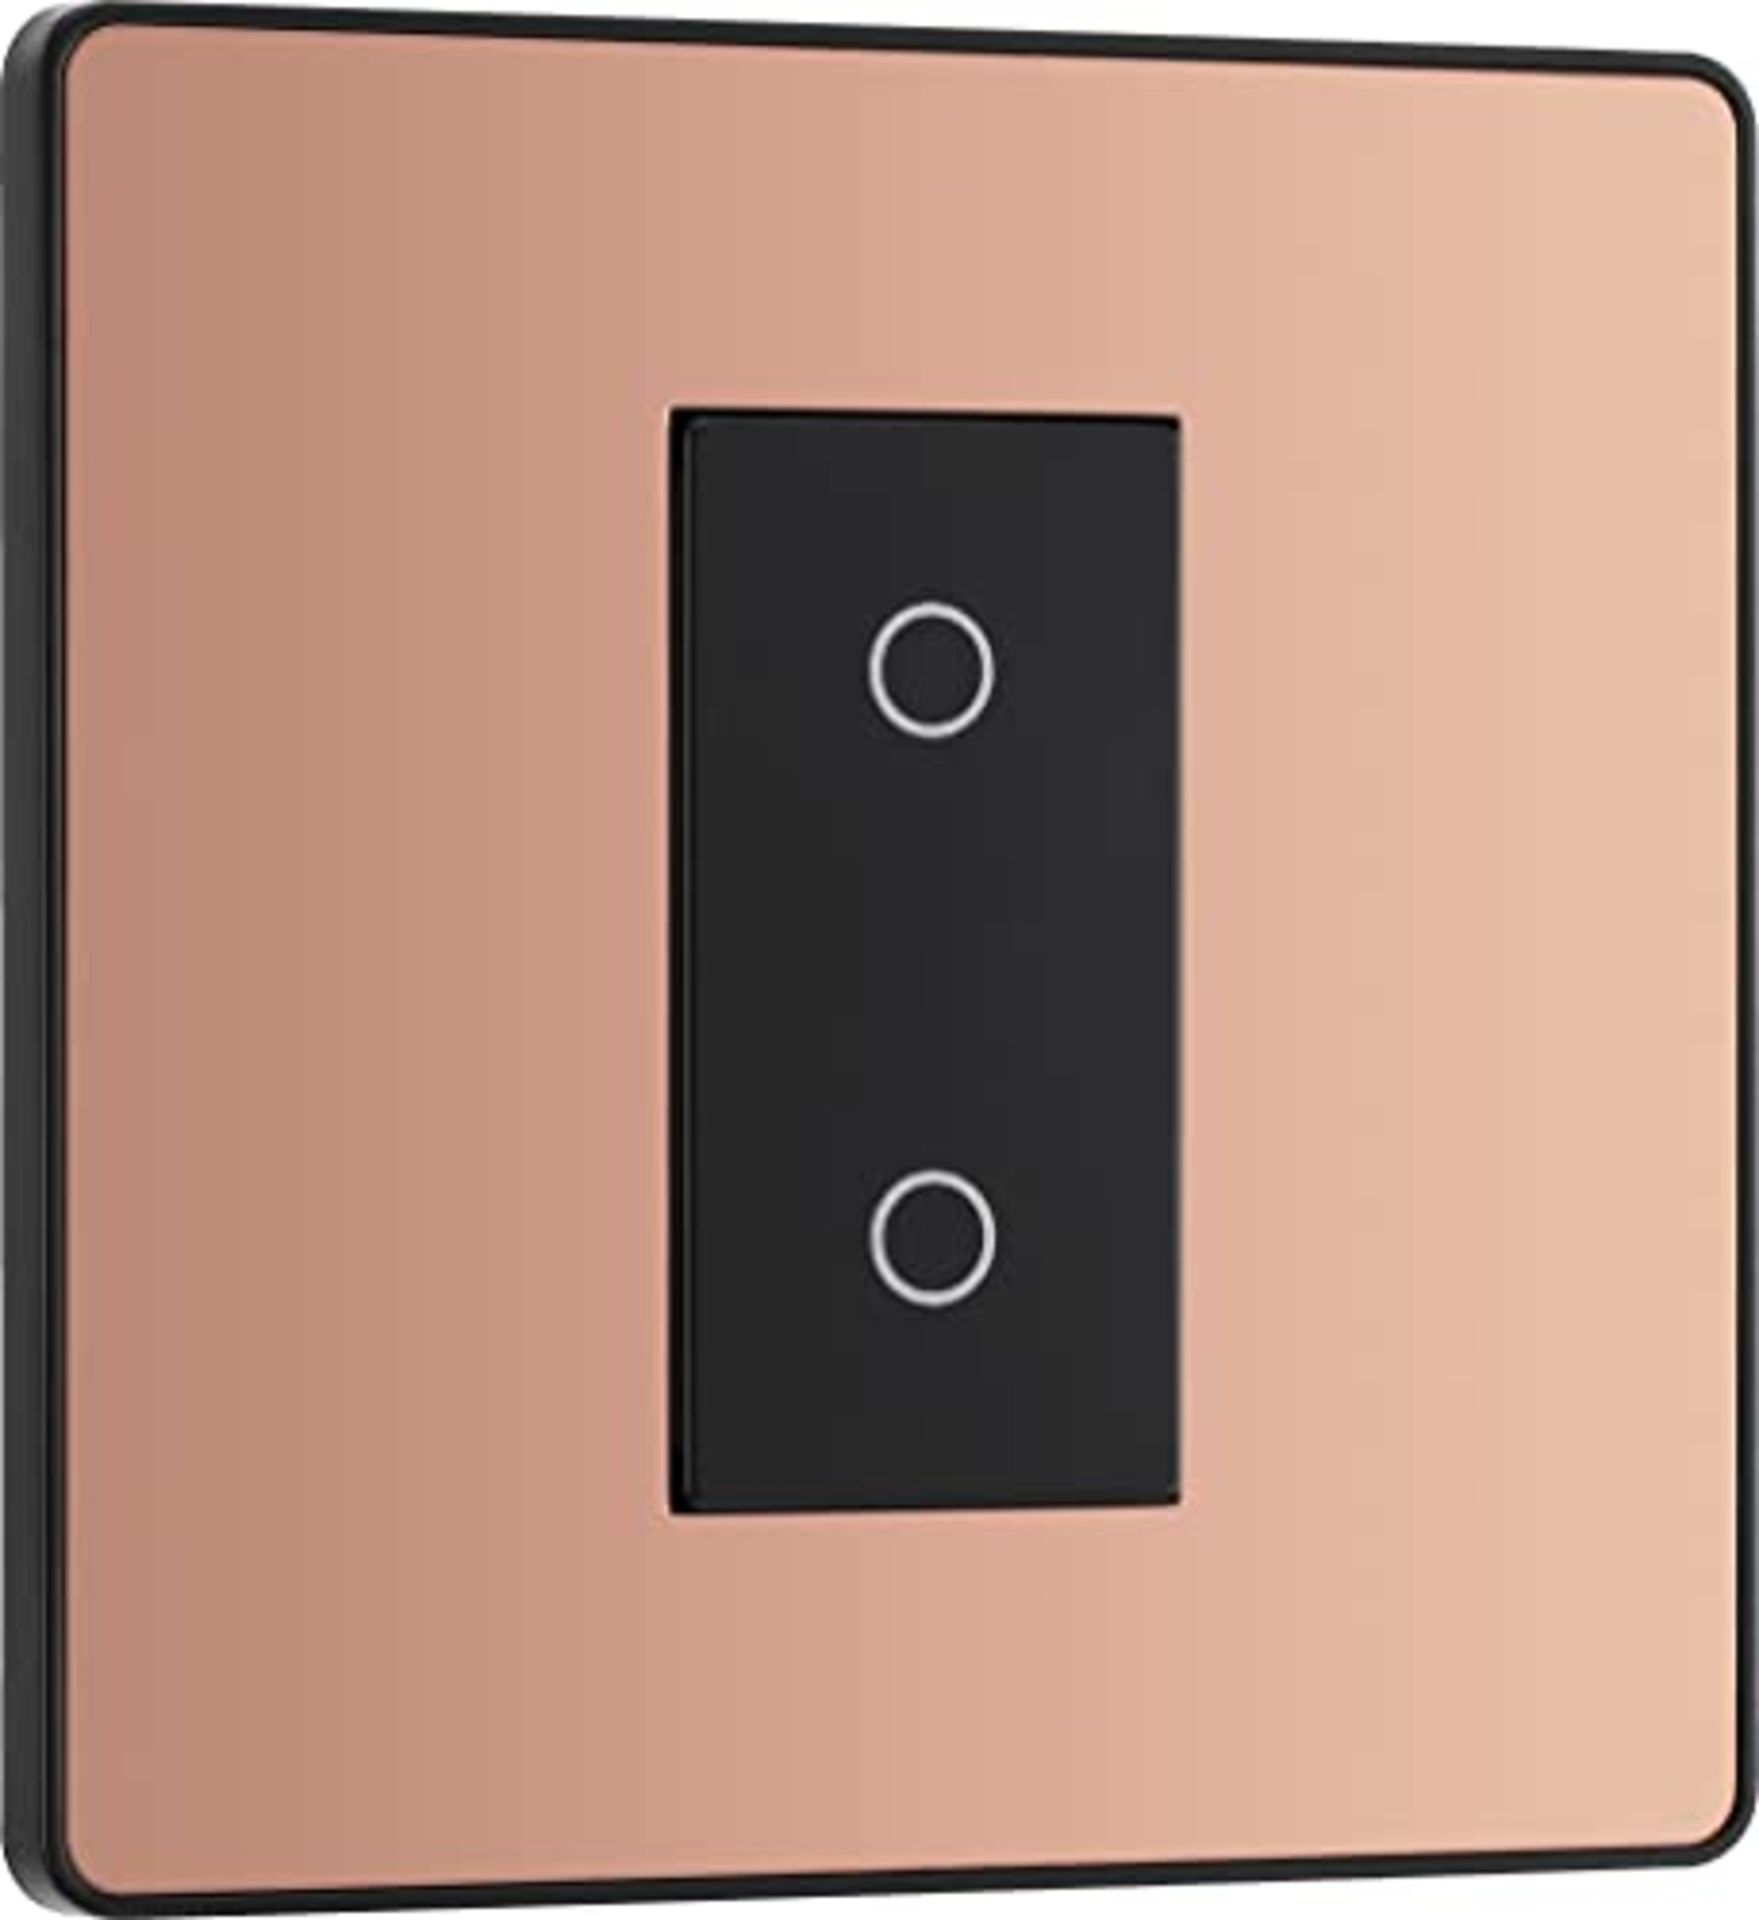 BG Electrical Evolve Single Touch Dimmer Switch, 2-Way Master, 200W, Polished Copper